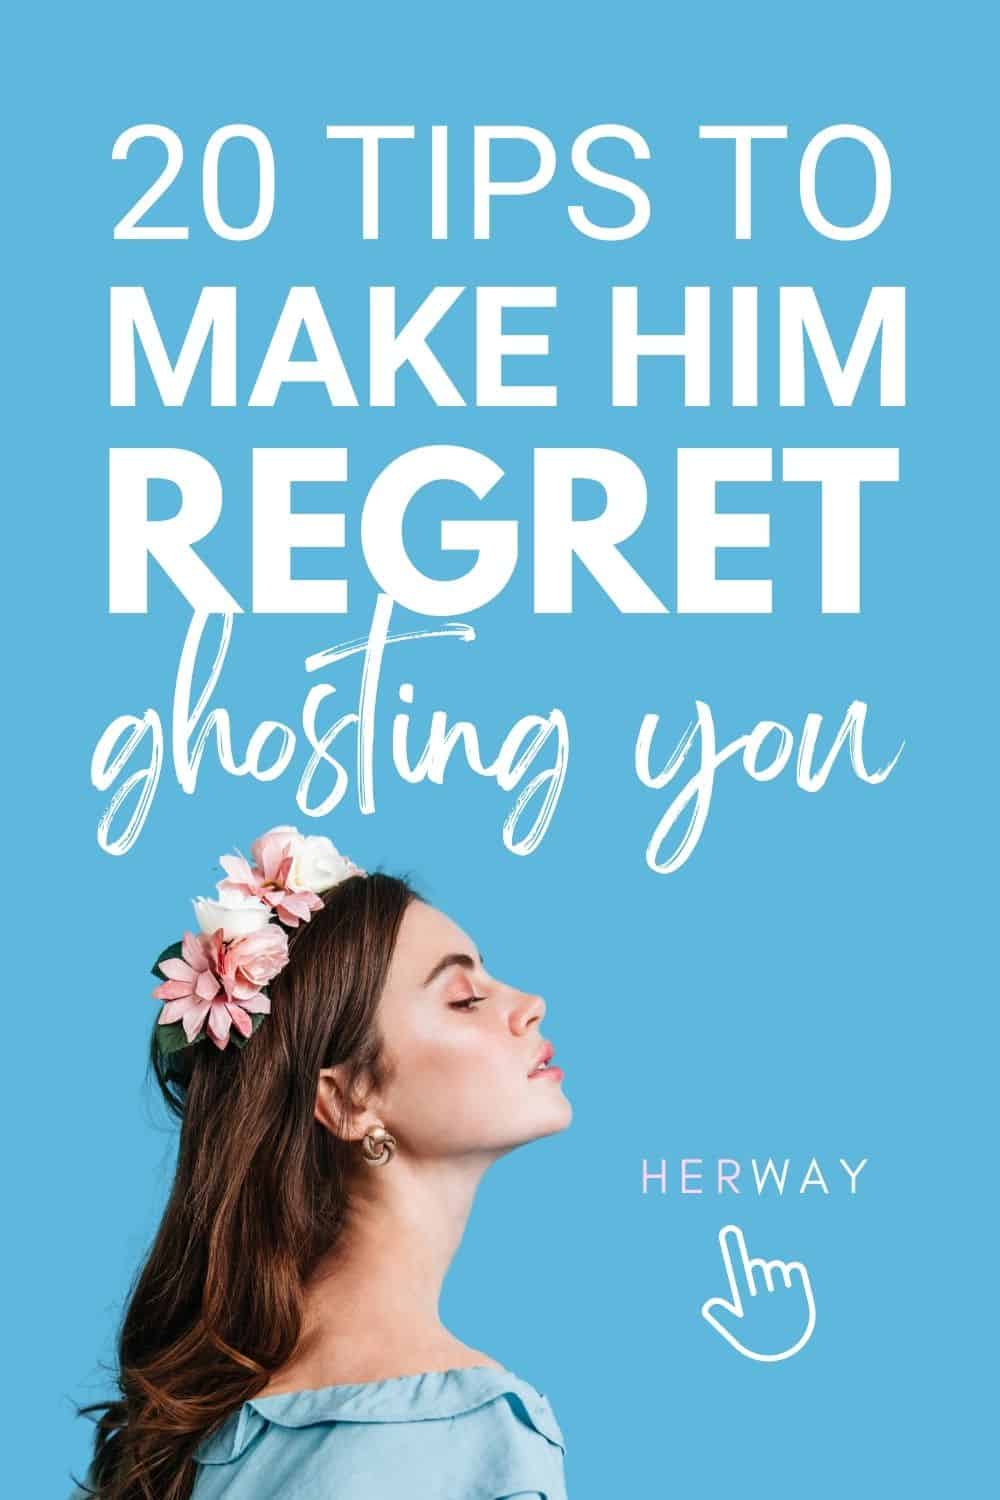 How To Make A Guy Regret Ghosting You (20 Effective Ways) Pinterest